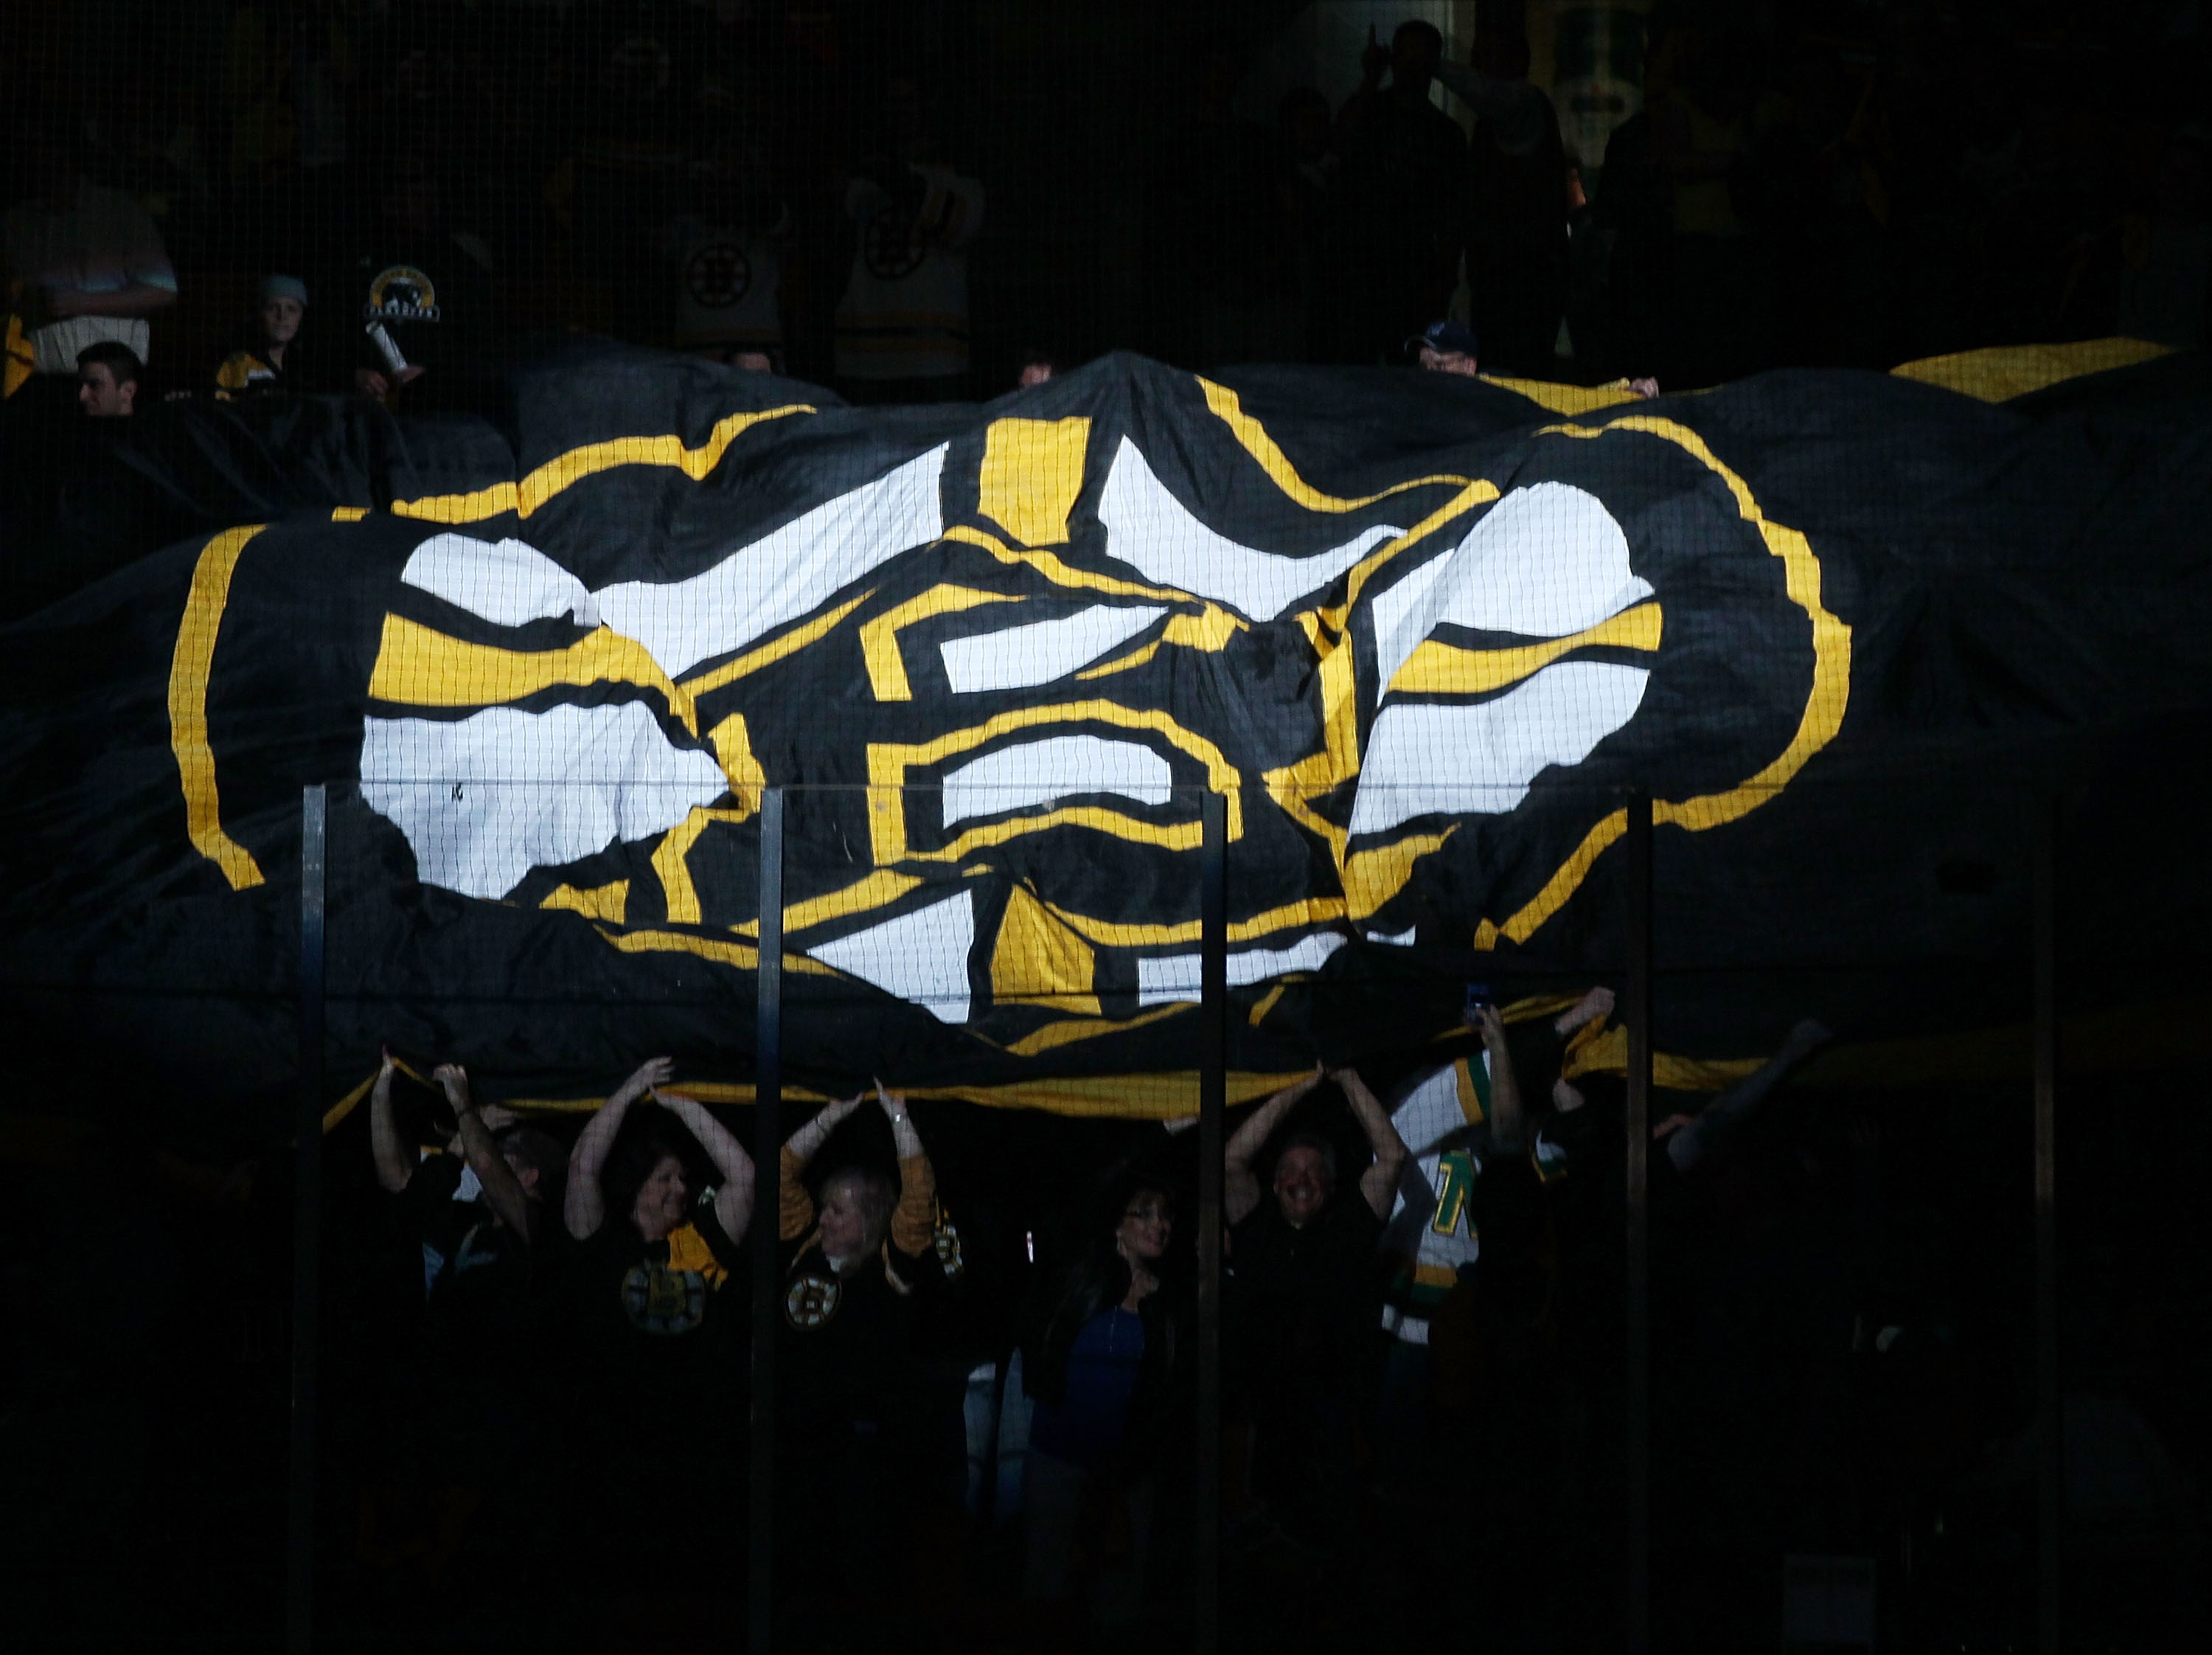 BOSTON - MAY 14:  Fans pass a giant flag before the Boston Bruins take on the Philadelphia Flyers in Game Seven of the Eastern Conference Semifinals during the 2010 NHL Stanley Cup Playoffs at TD Garden on May 14, 2010 in Boston, Massachusetts.  (Photo by